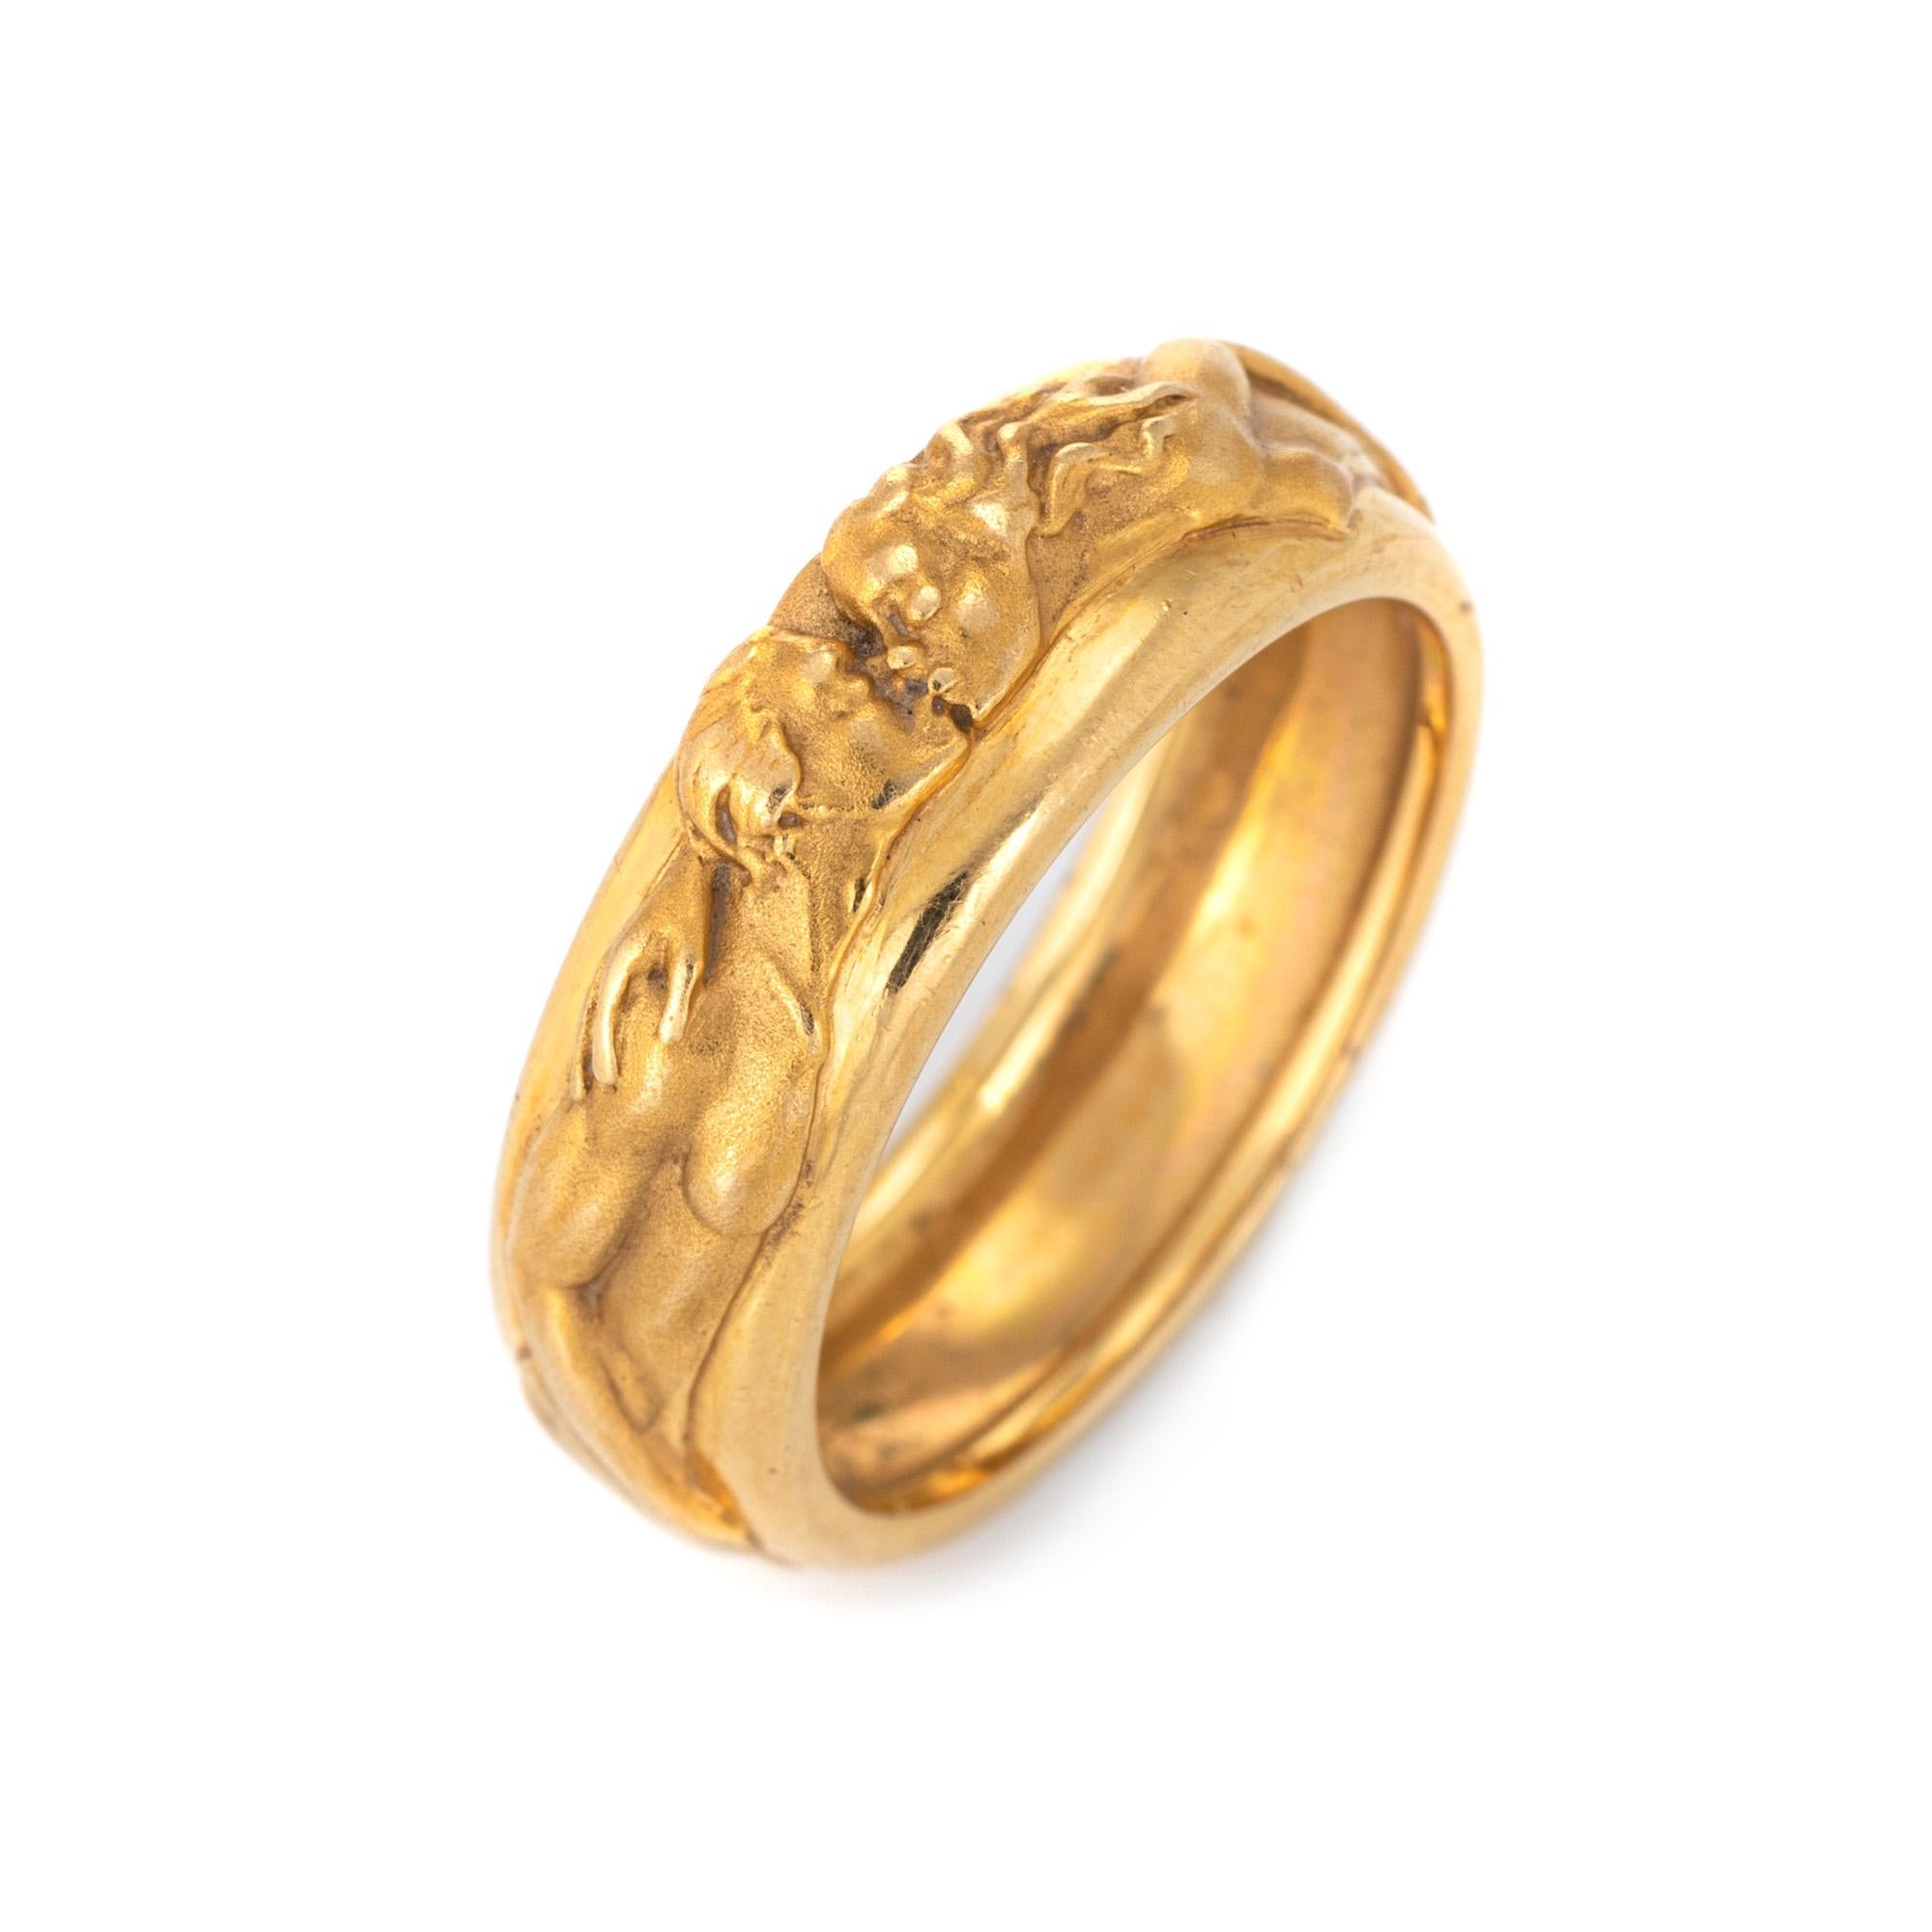 Finely detailed Carrera y Carrera Promesa ring (circa 2014) crafted in 14 karat yellow gold. 

The beautifully detailed ring features a man and woman enveloped around the band in matte gold, coming together to kiss. The ring is from the 'Promesa'